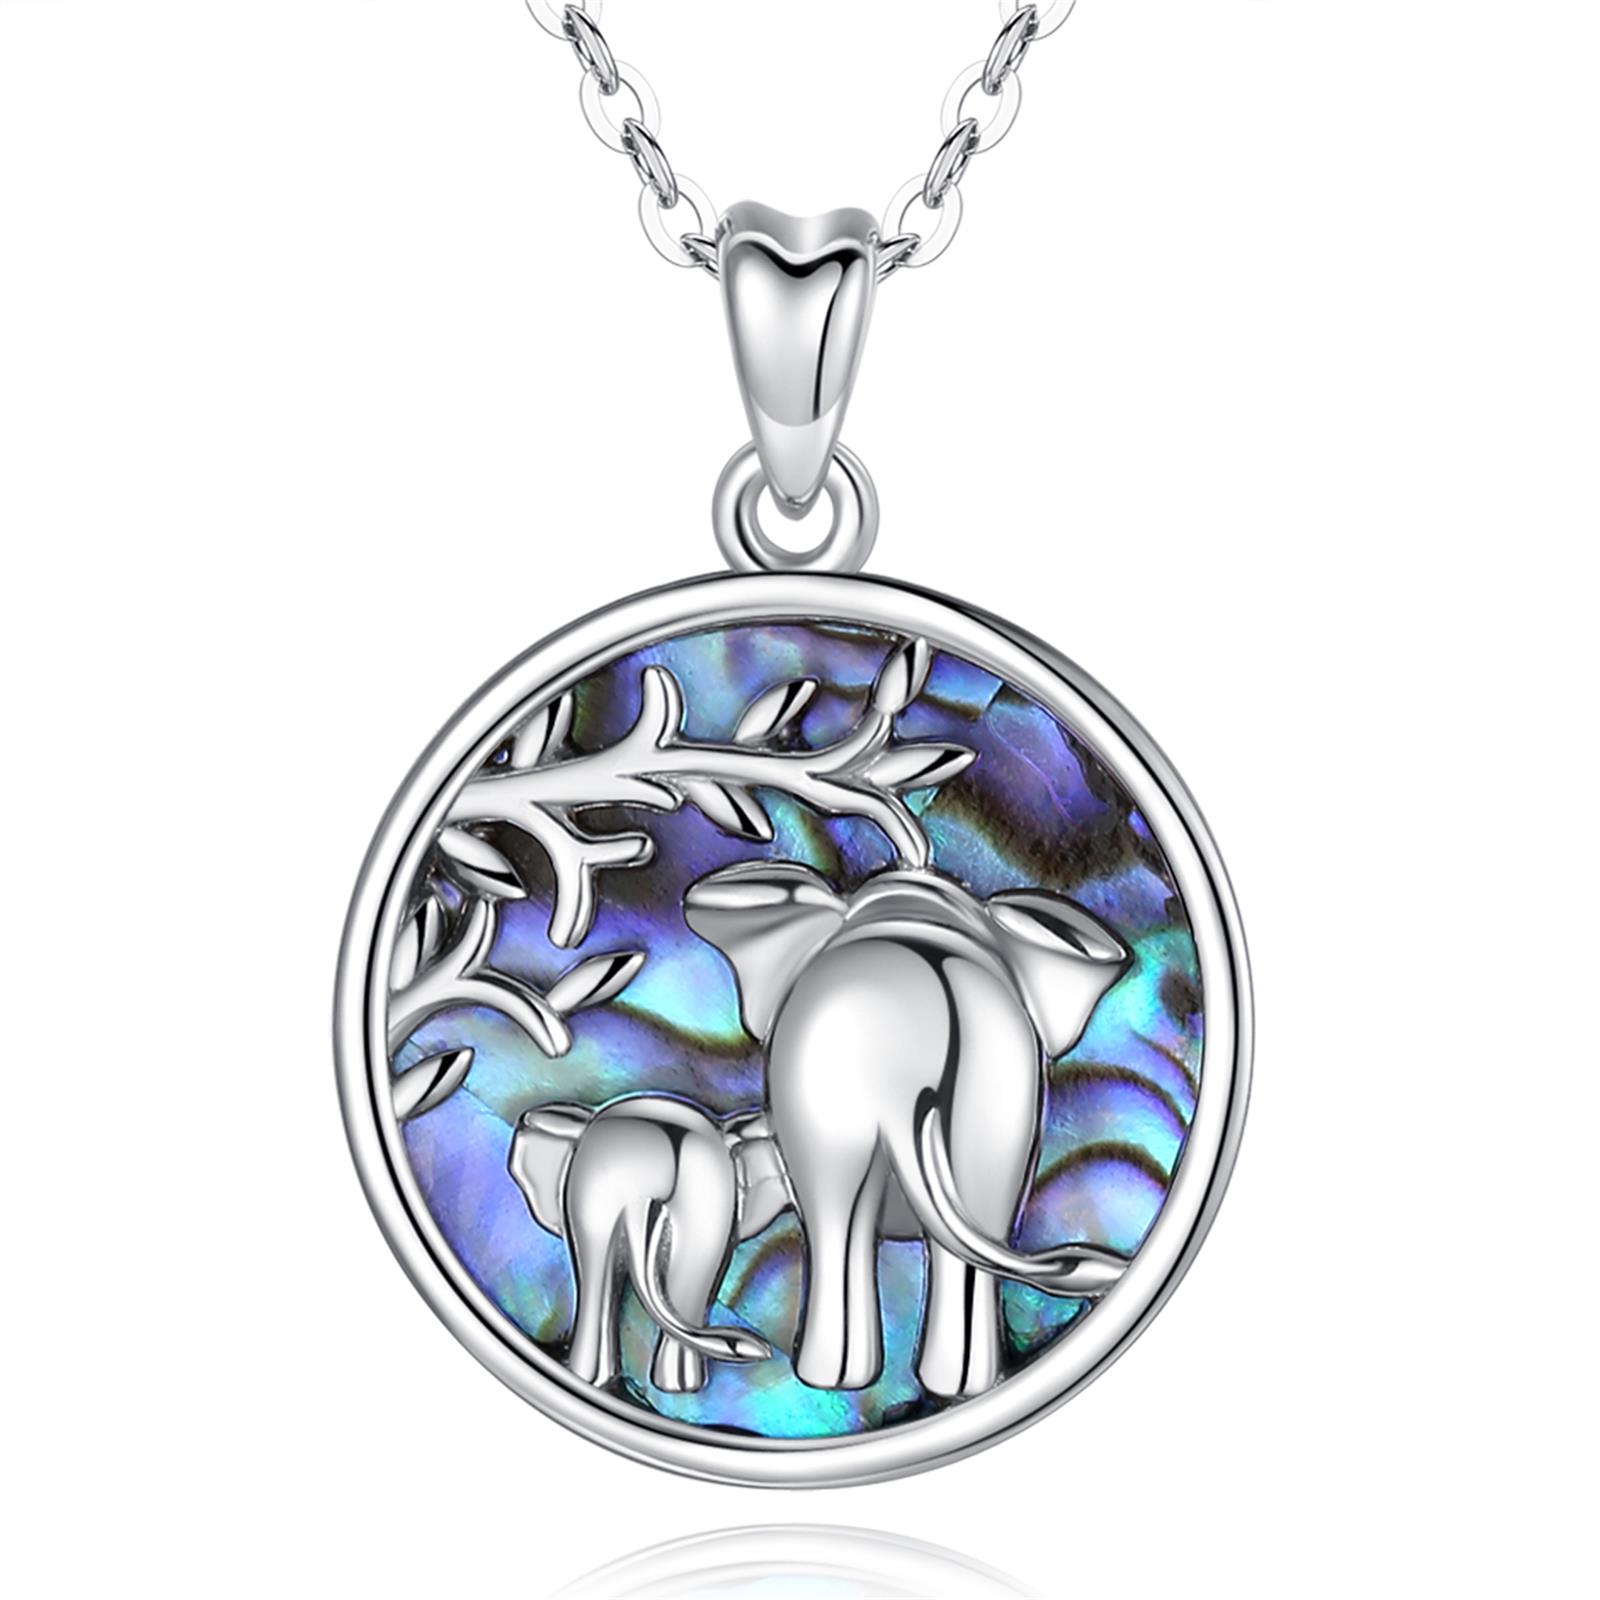 Merryshine Jewelry Colorful Abalone Shell S925 Sterling Silver Mother And Child Lucky Elephant Charm Necklace